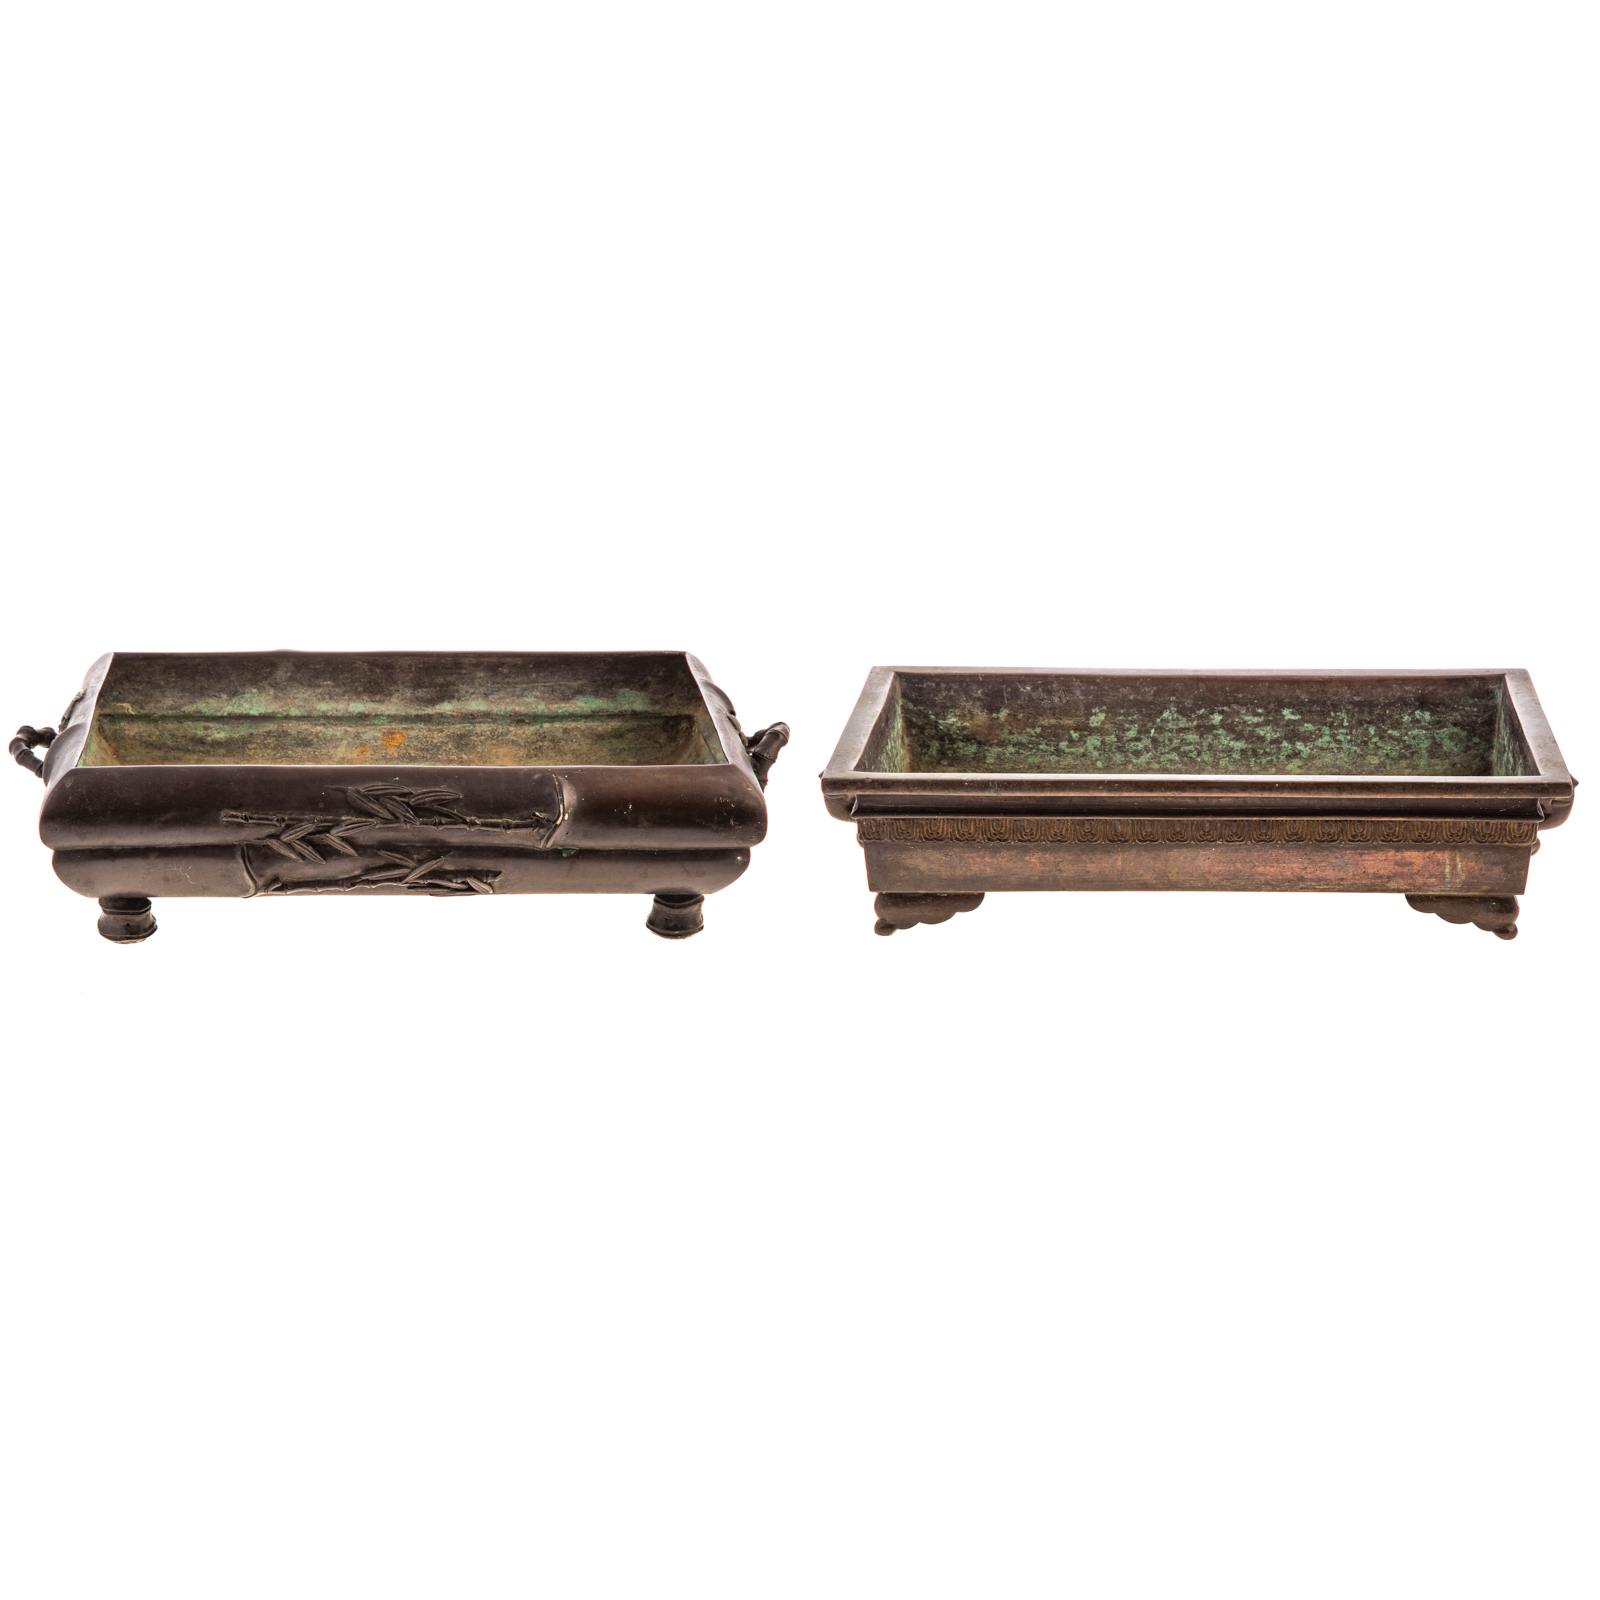 TWO CHINESE BRONZE BULB PLANTERS 28788e